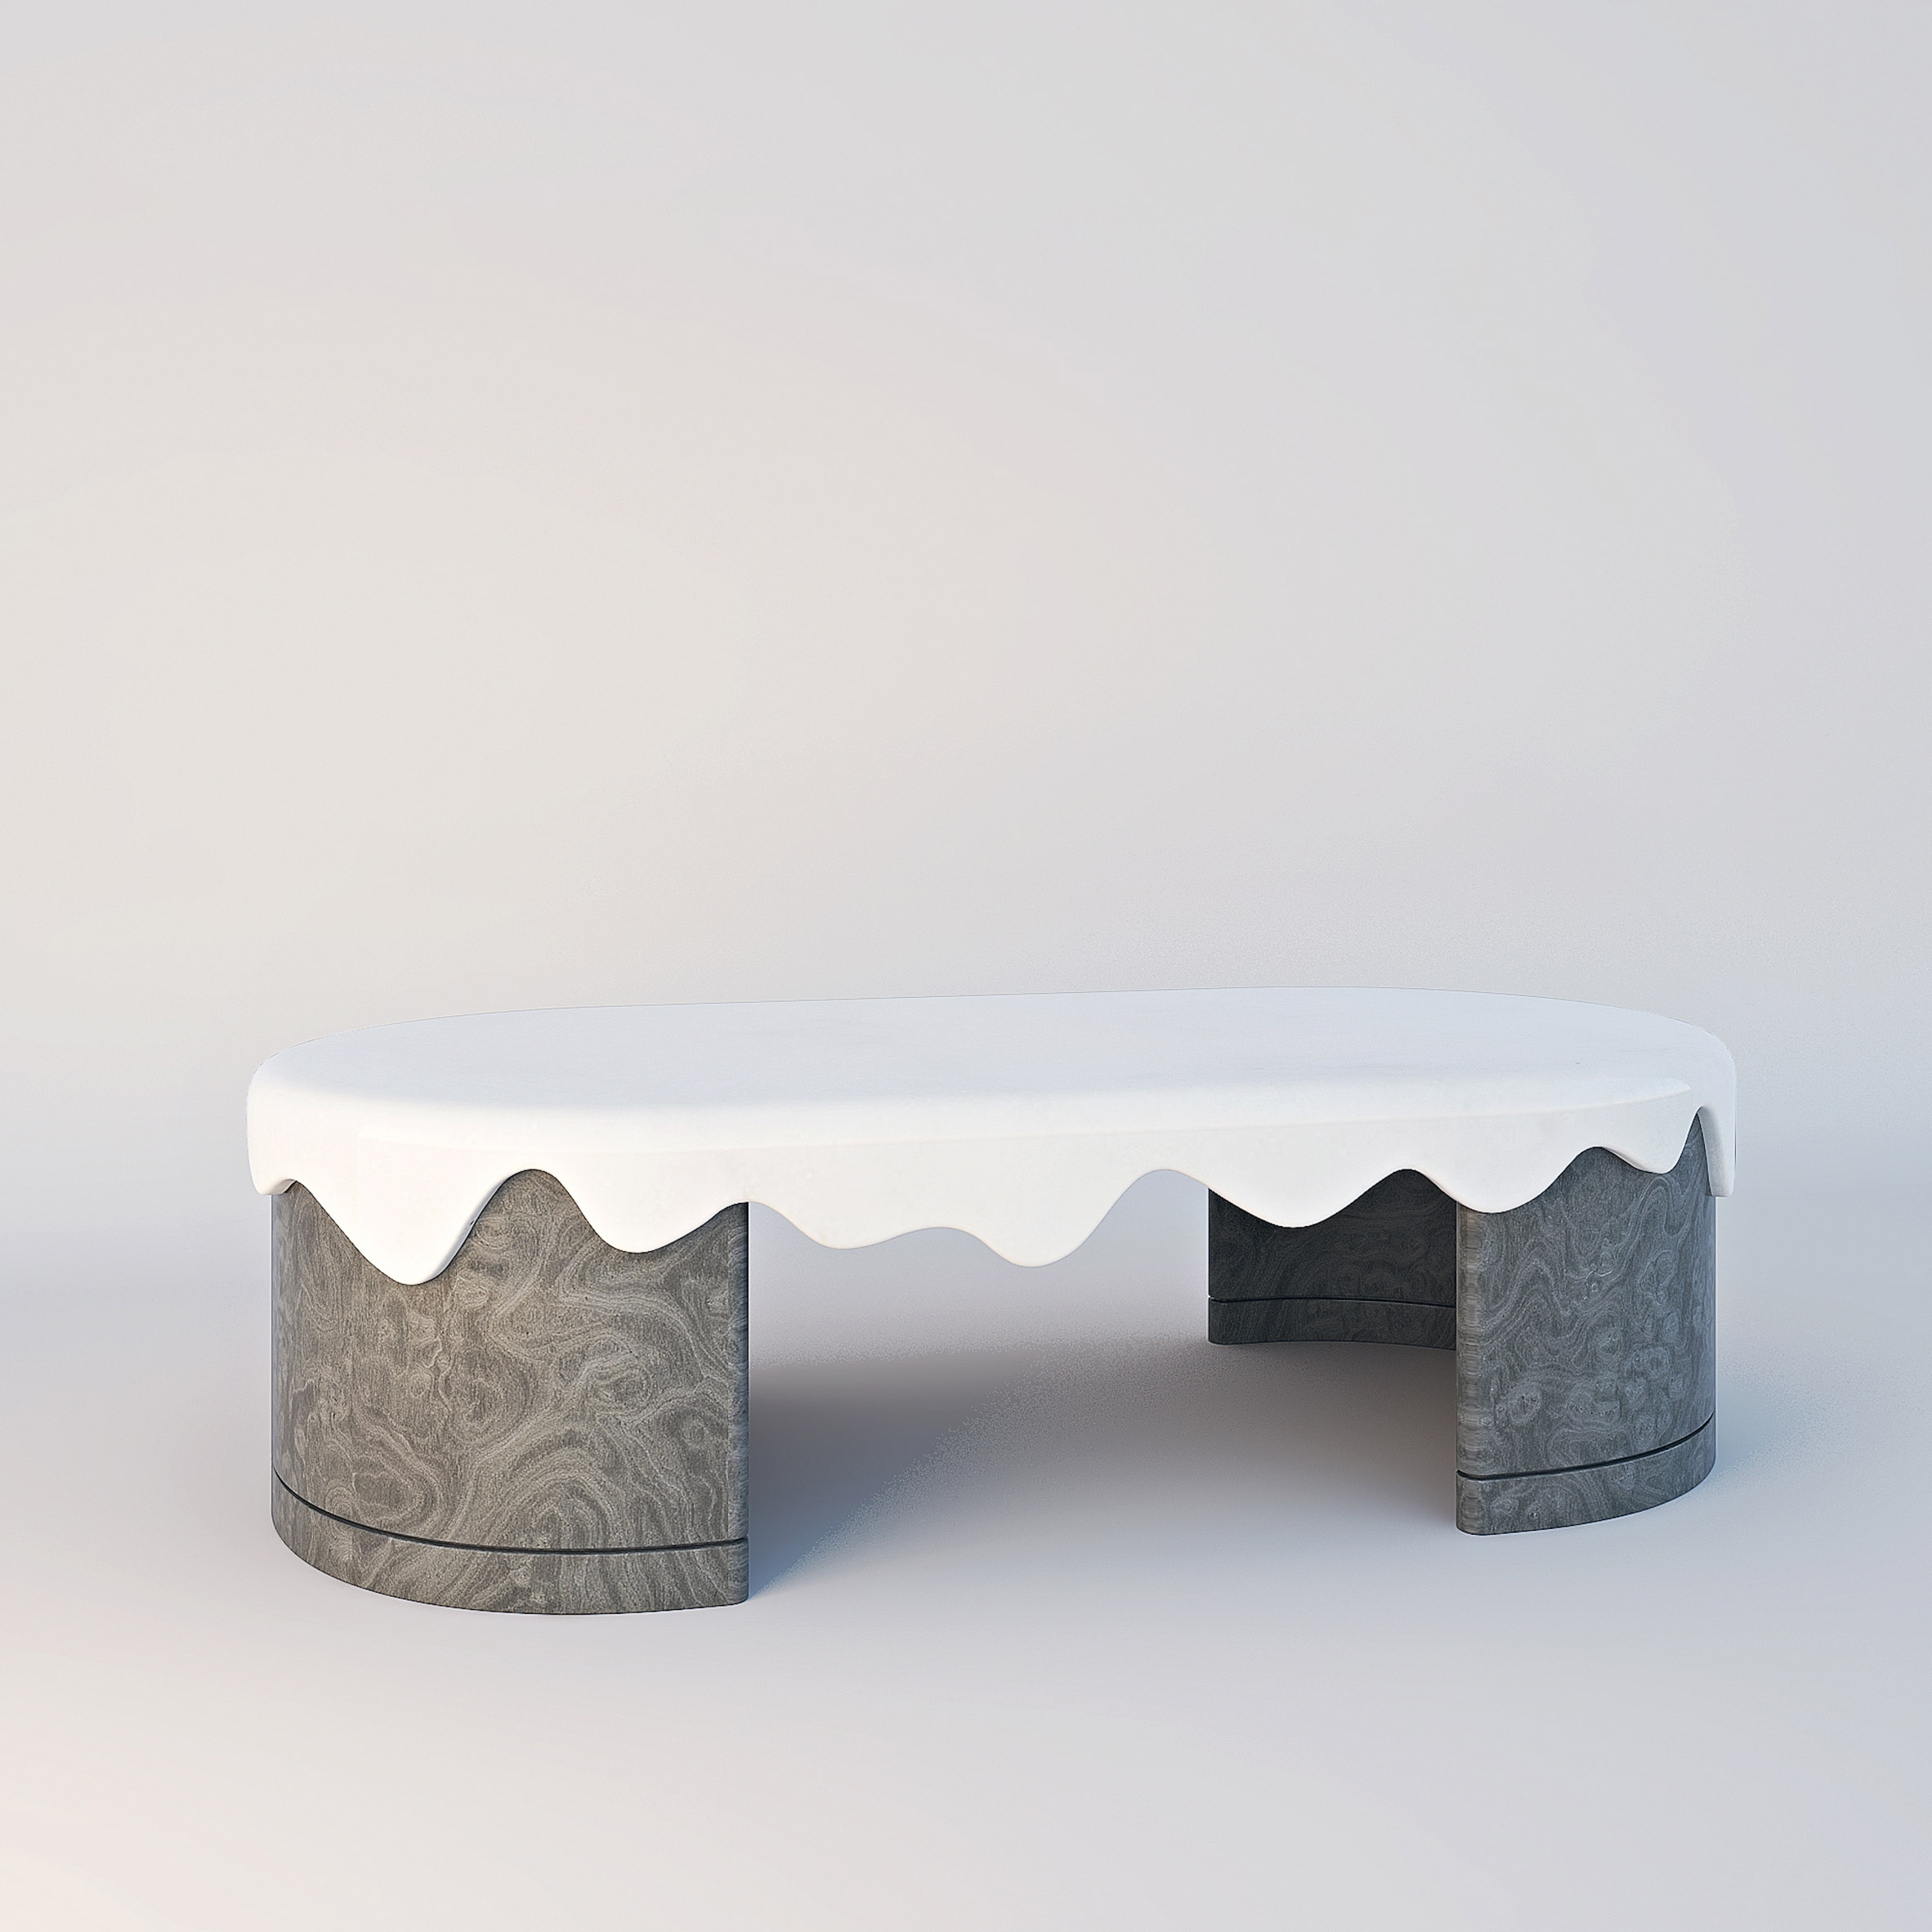 A photograph of the Melt coffee table by Marble Balloon